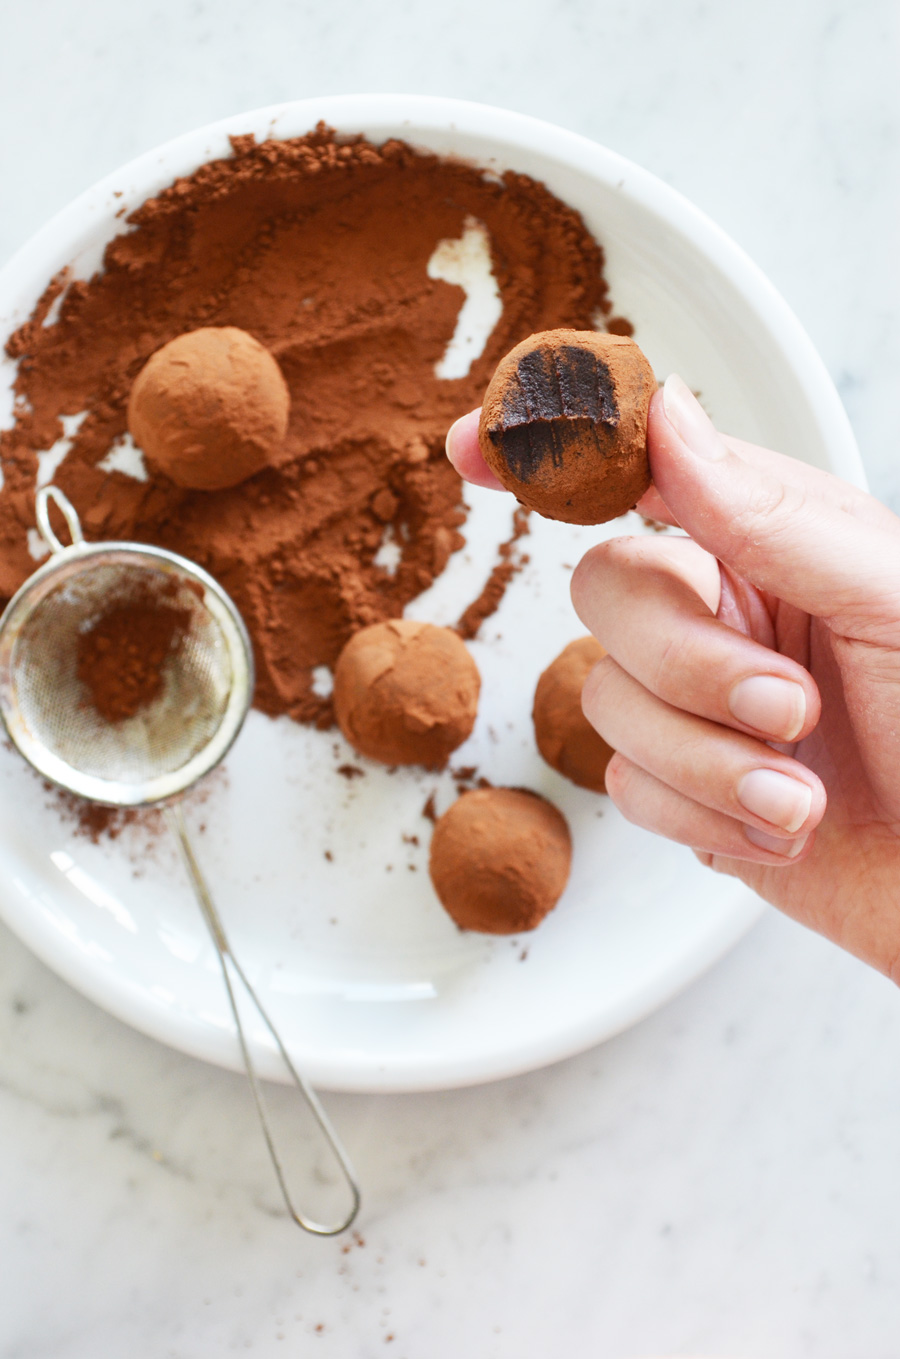 Whole food healthier 3 ingredient chocolate truffles by That Healthy Kitchen